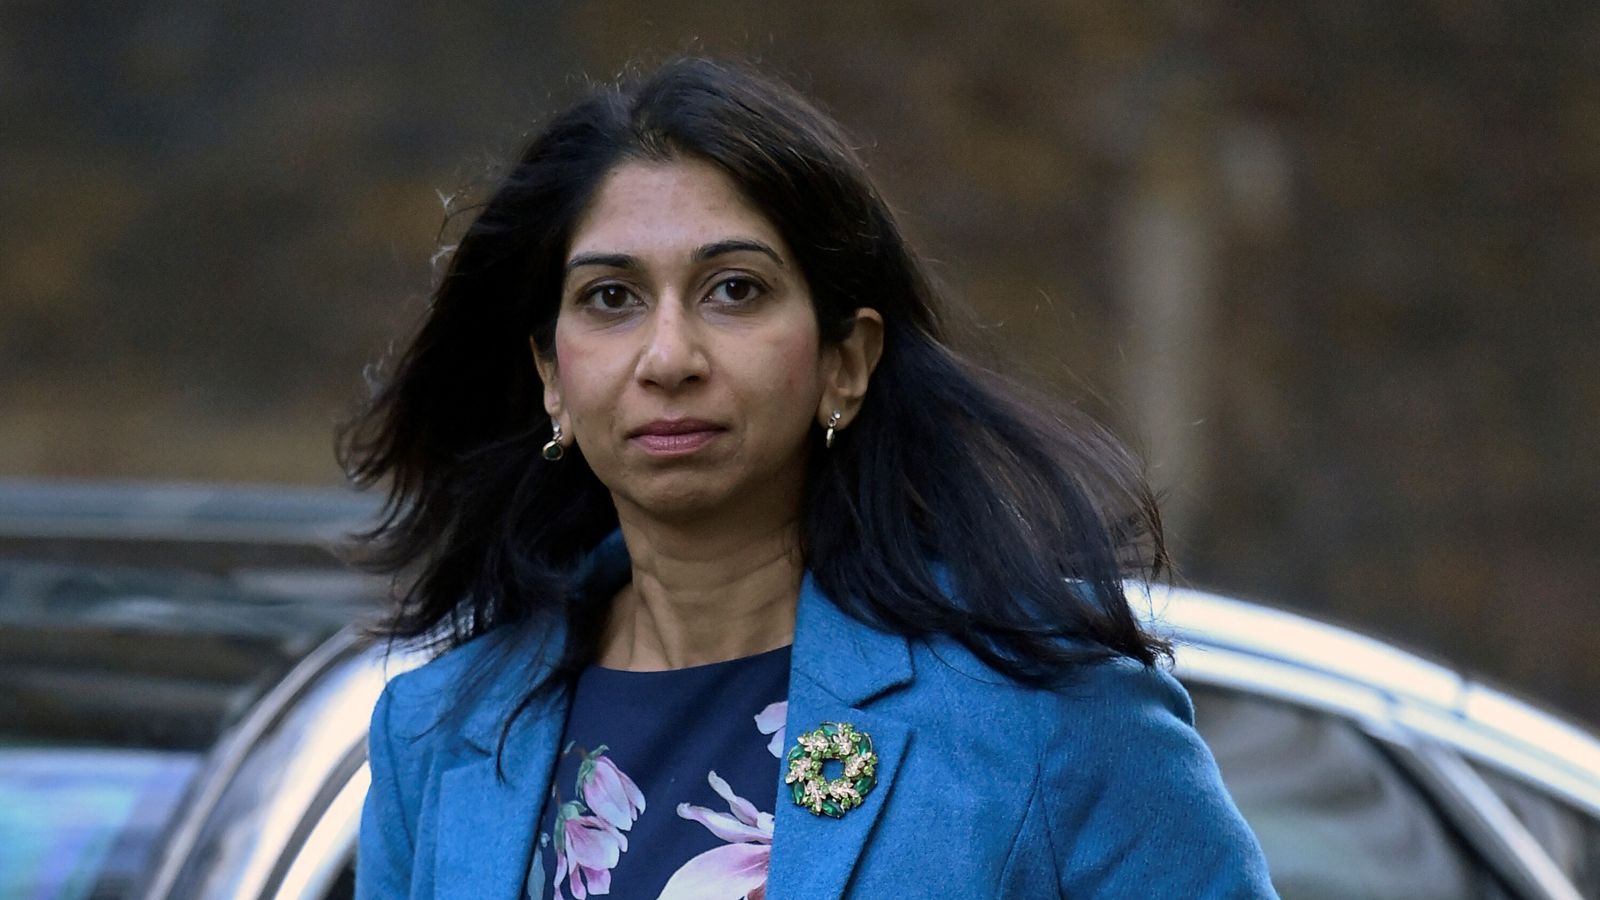 Suella Braverman faces backlash for rowing back on Windrush reforms 